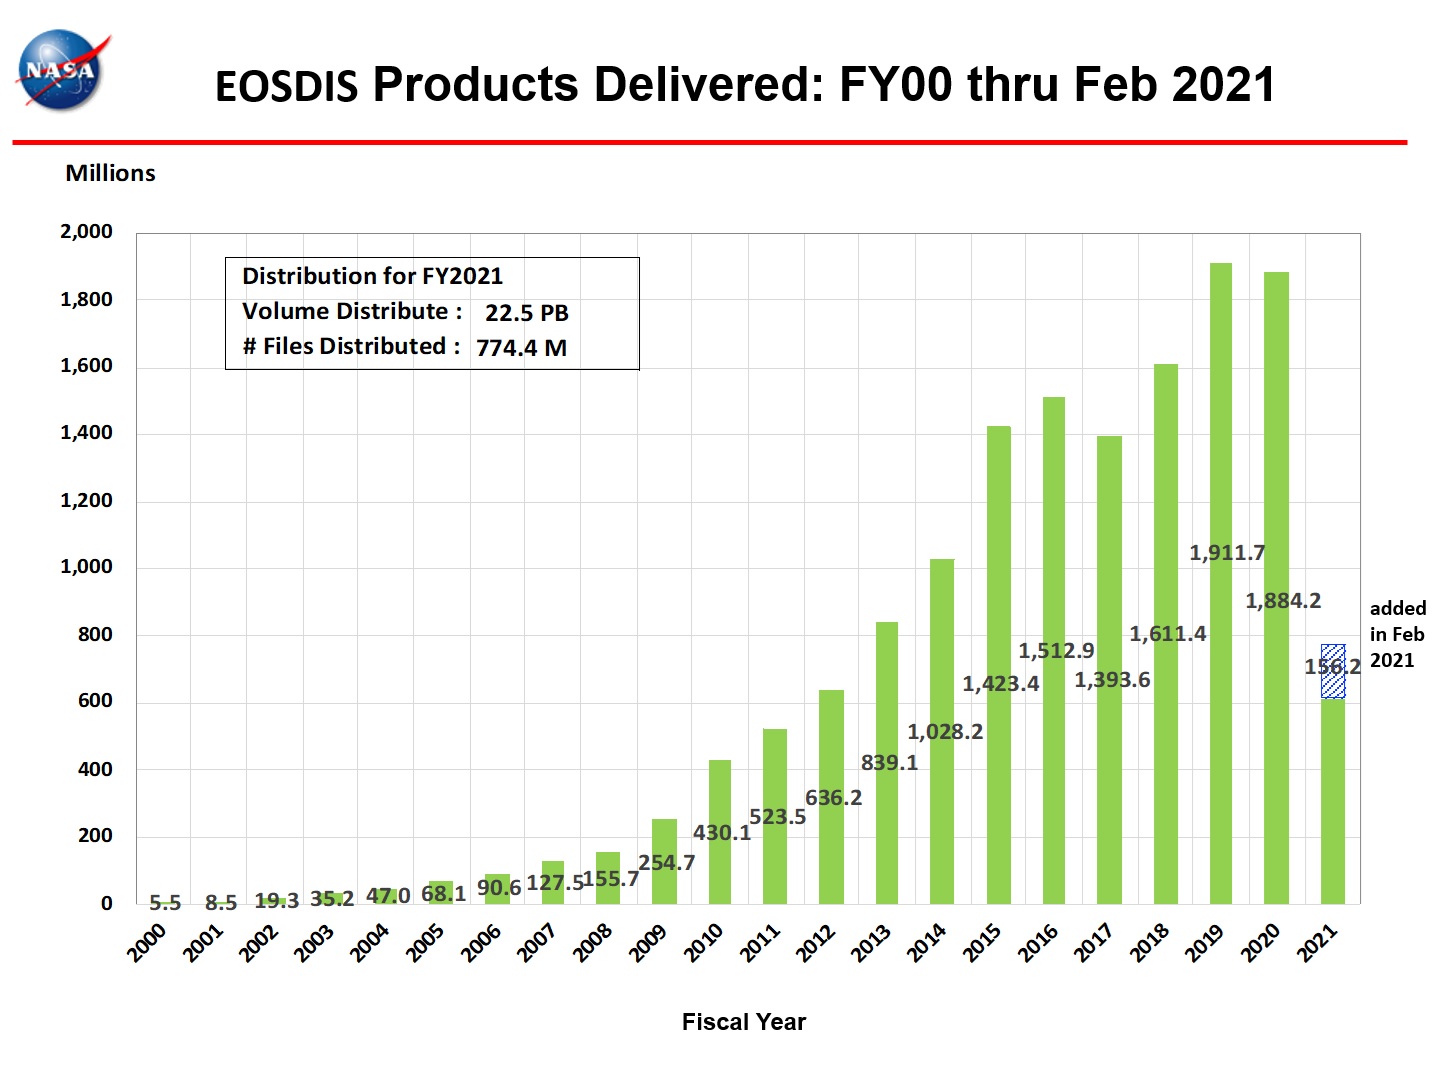 EOSDIS Products Delivered 1-2021